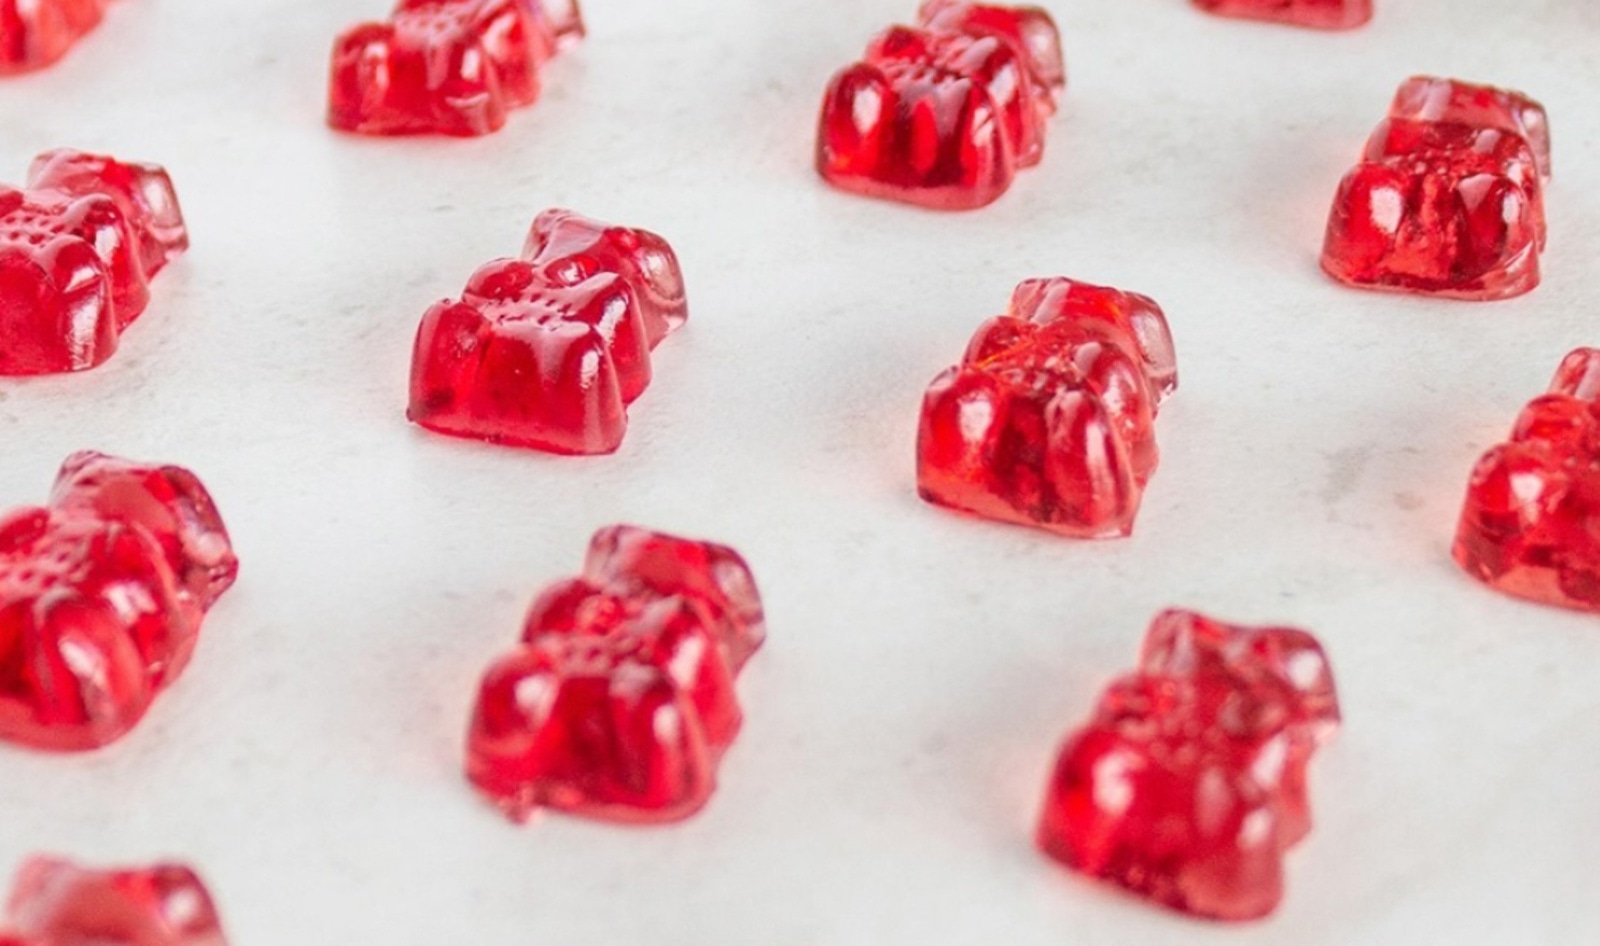 This $50 Million Vegan Gummy Candy Brand Is About to Go Public in Canada